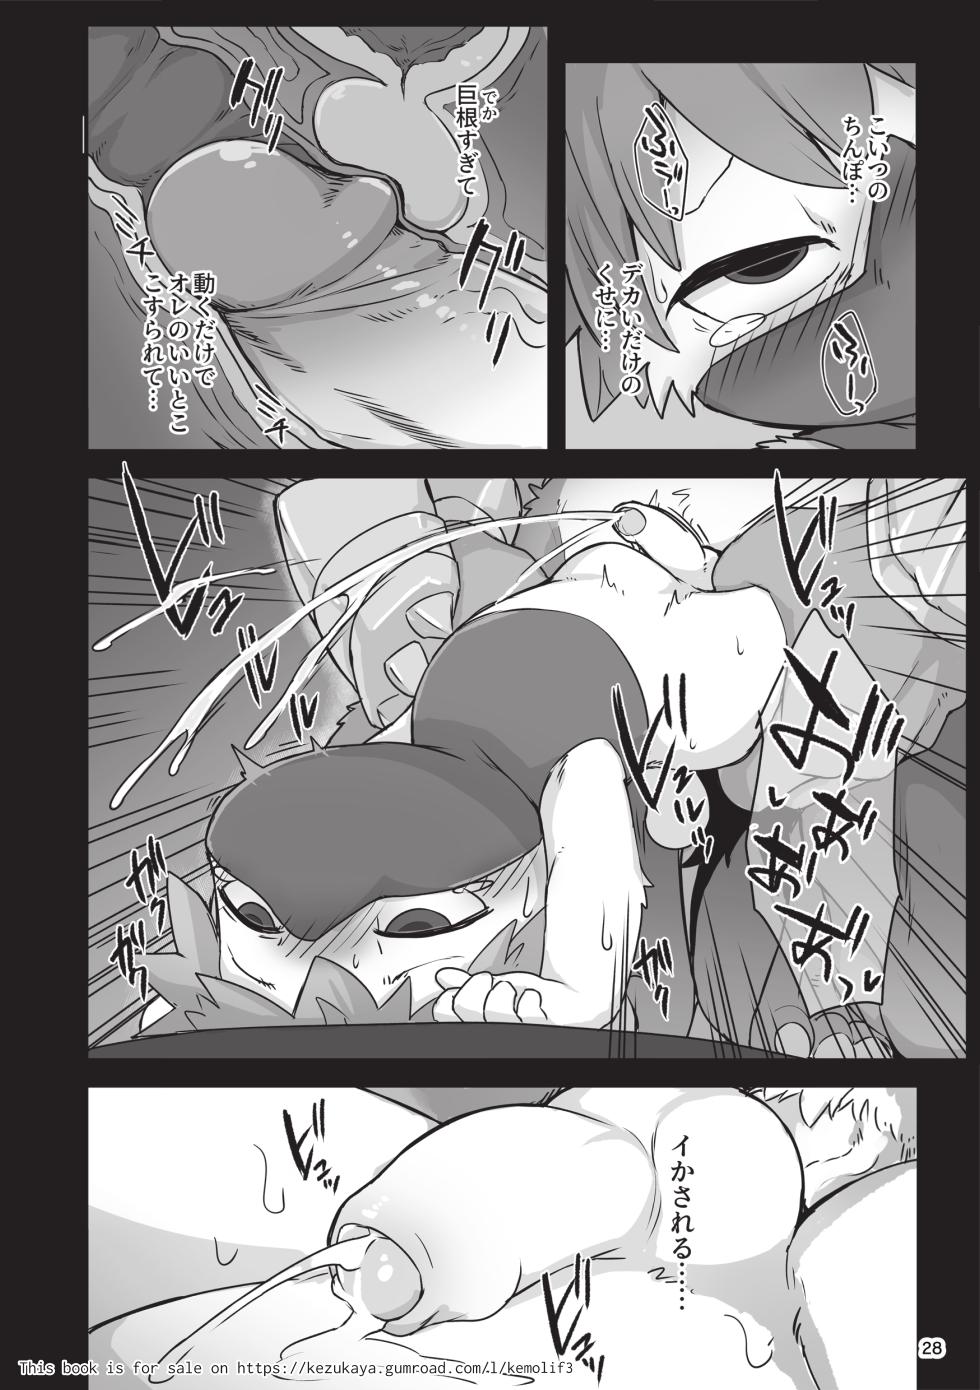 [Kezukaya (Various)] Welcome to Kemmoner's Rift!! Tri (League of Legends) [Digital][Gumroad/Uncensored version] - Page 28